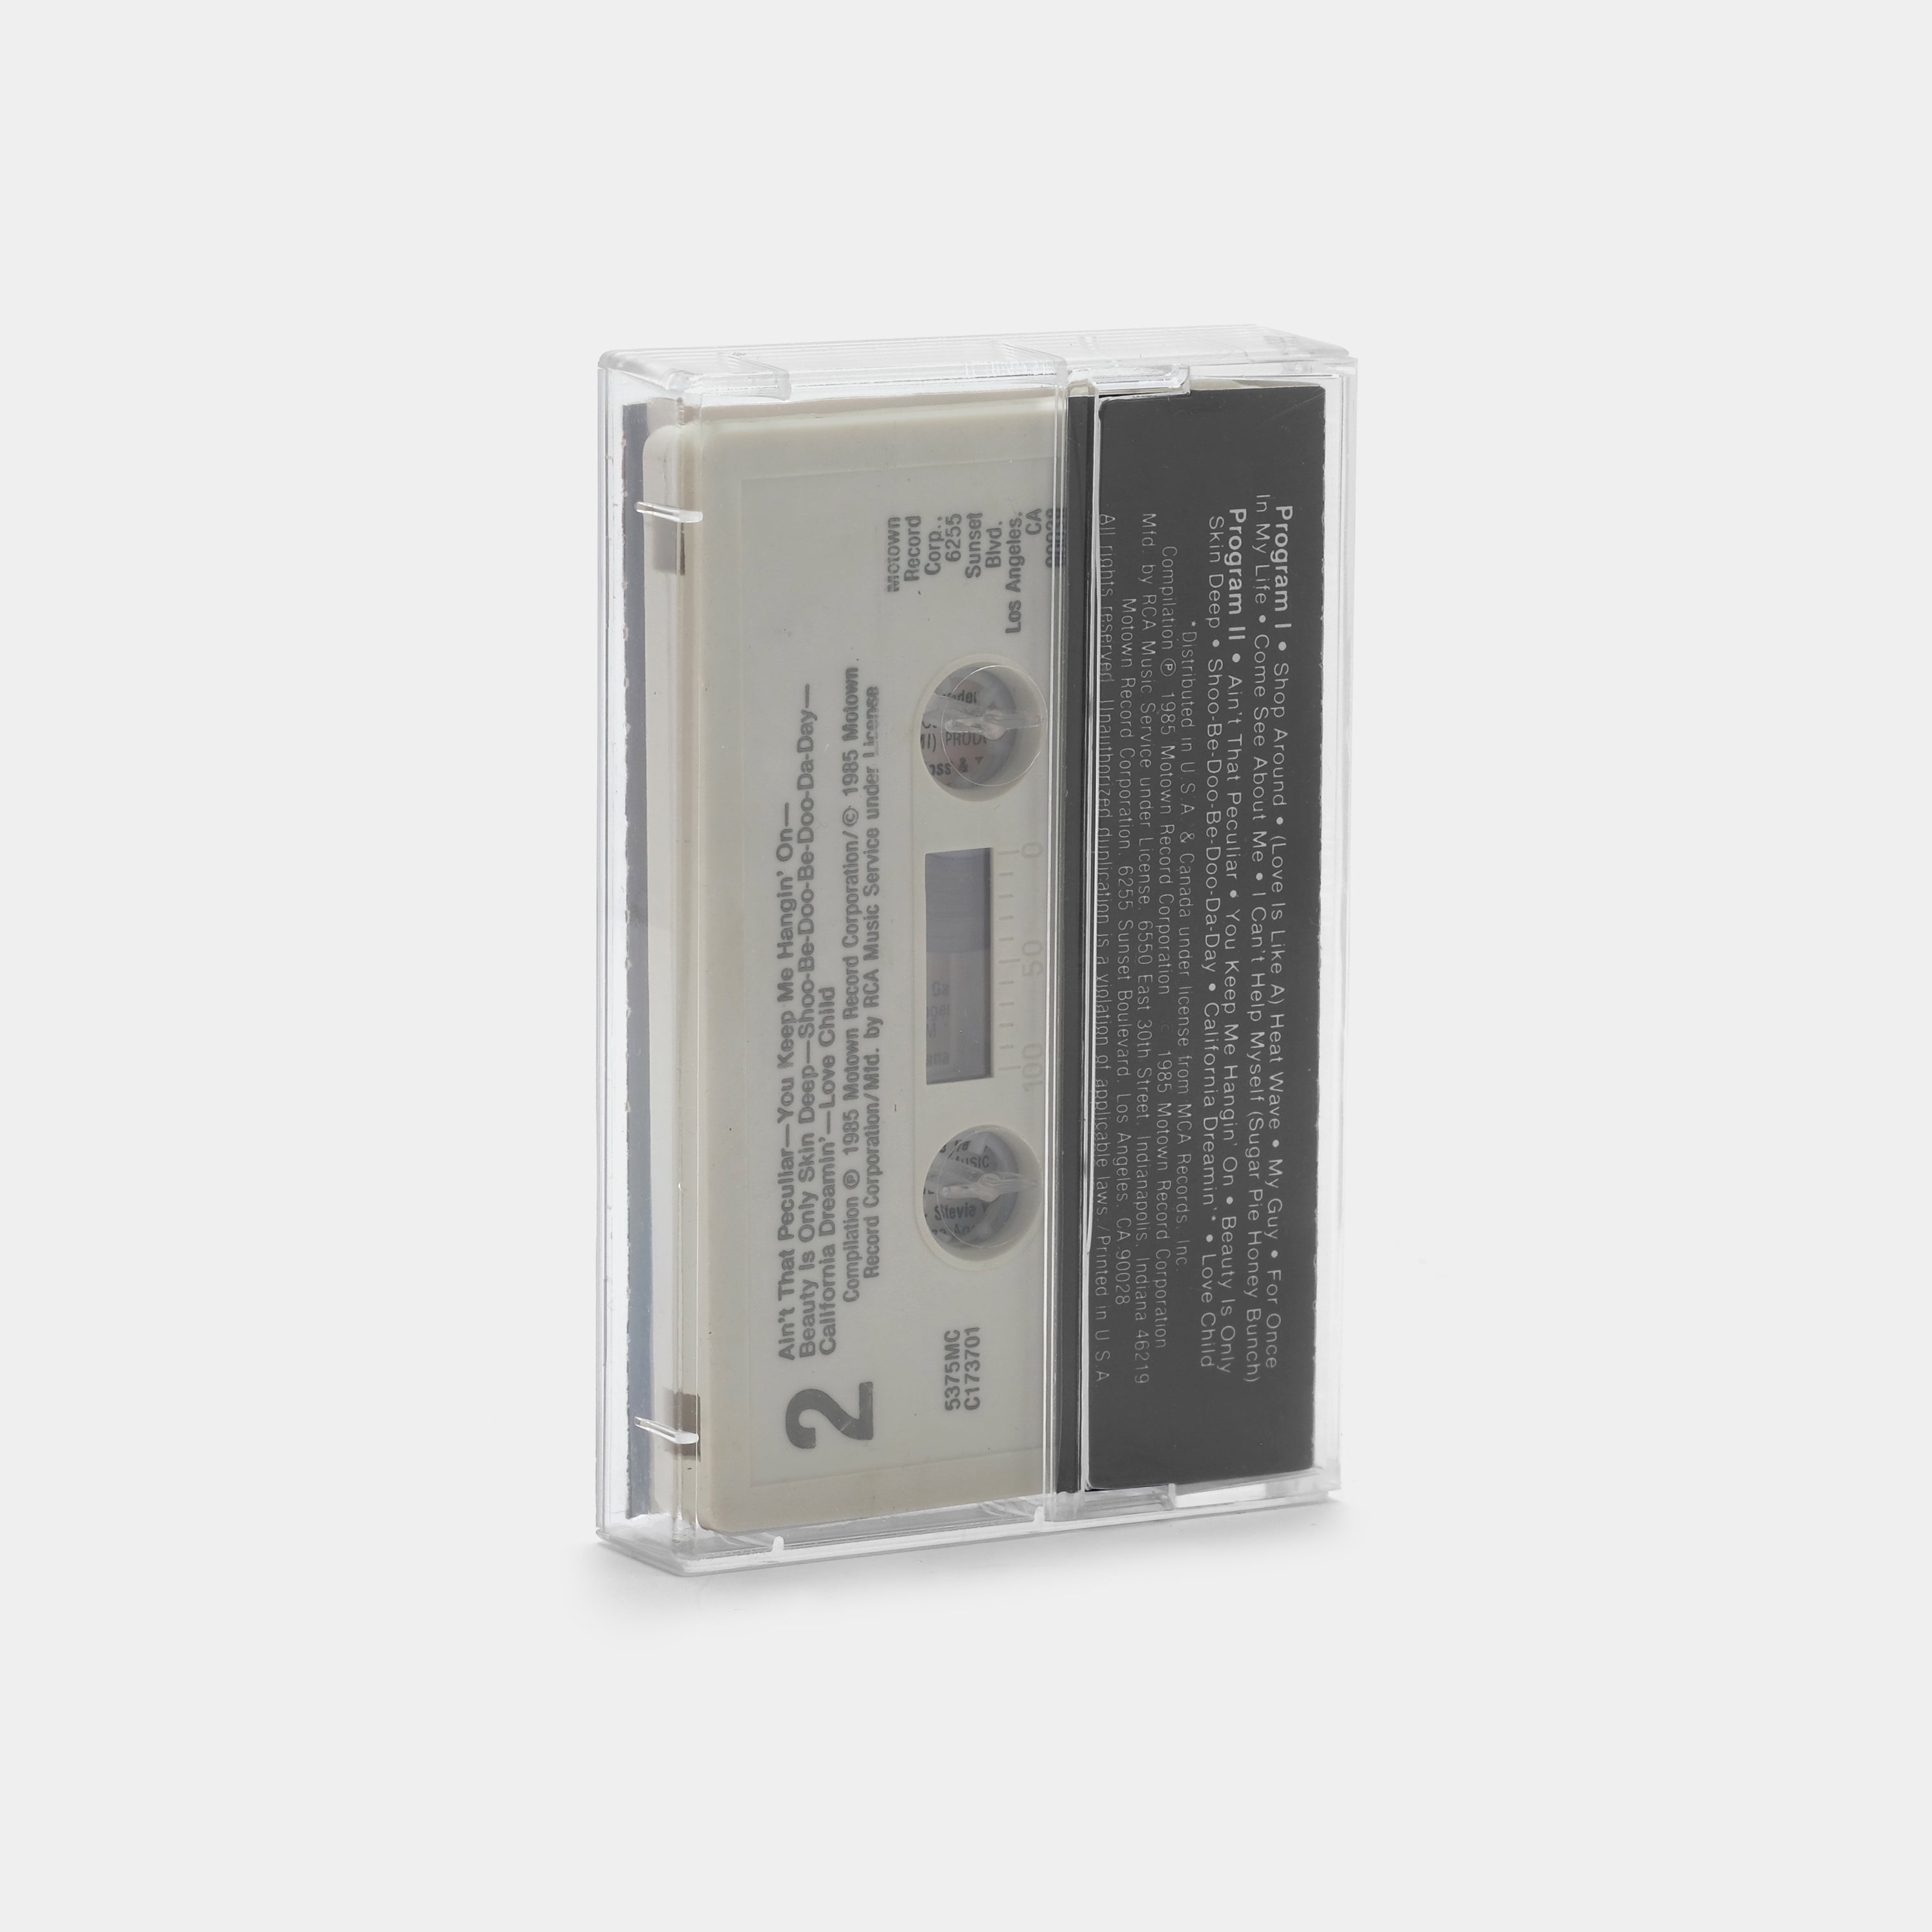 The Good-Feeling Music of the Big Chill Generation Volume 1 Cassette Tape